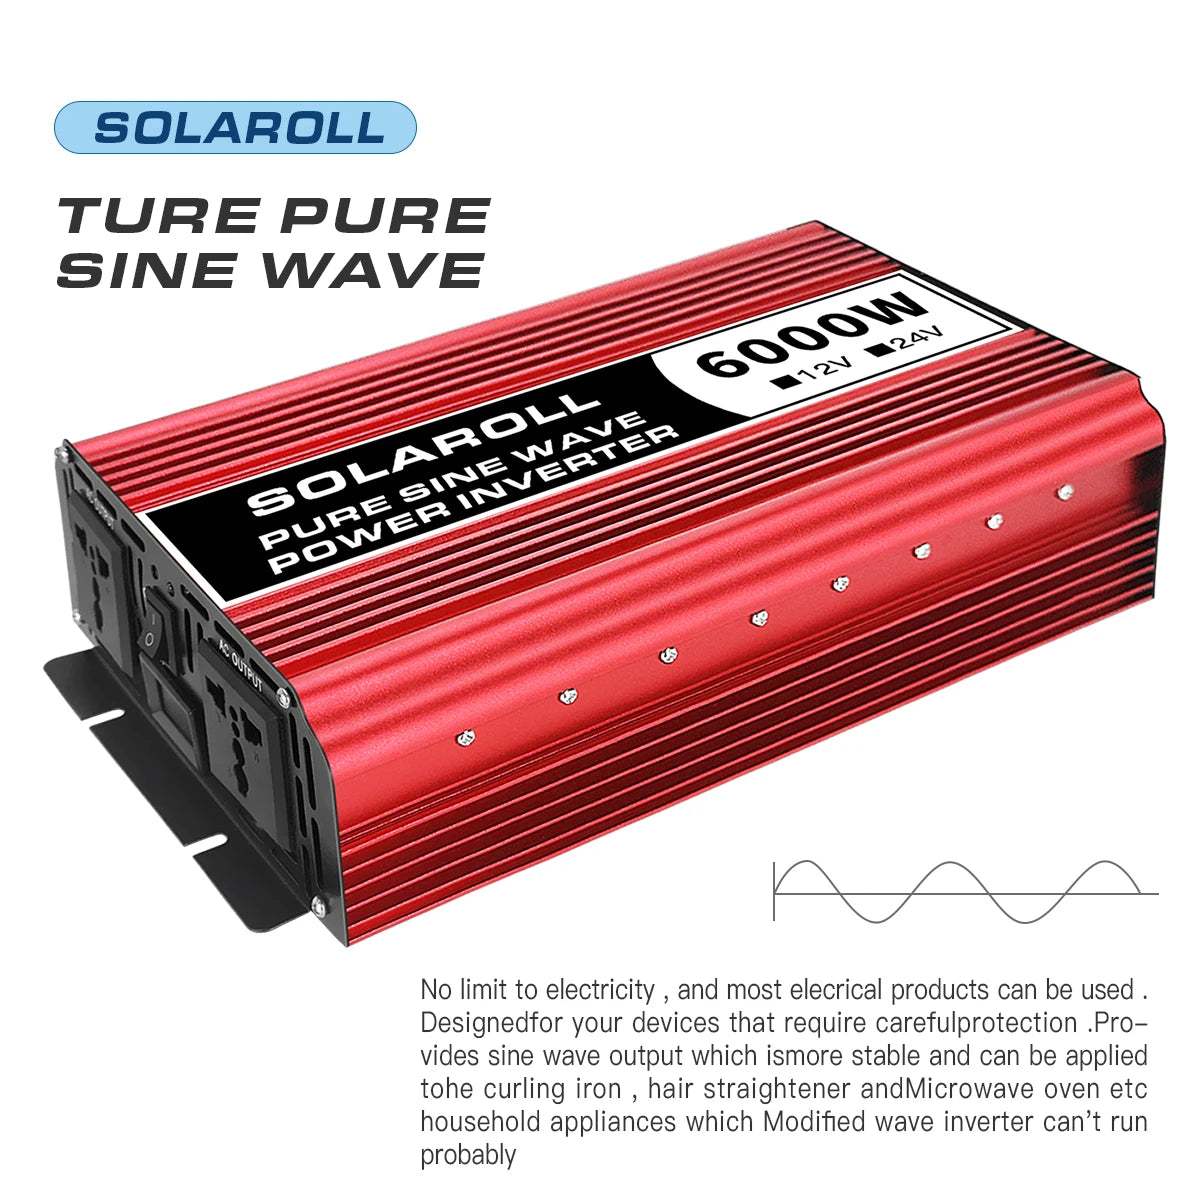 Solaroll's Pure Sine Wave Inverter converts DC power to AC, suitable for household appliances.